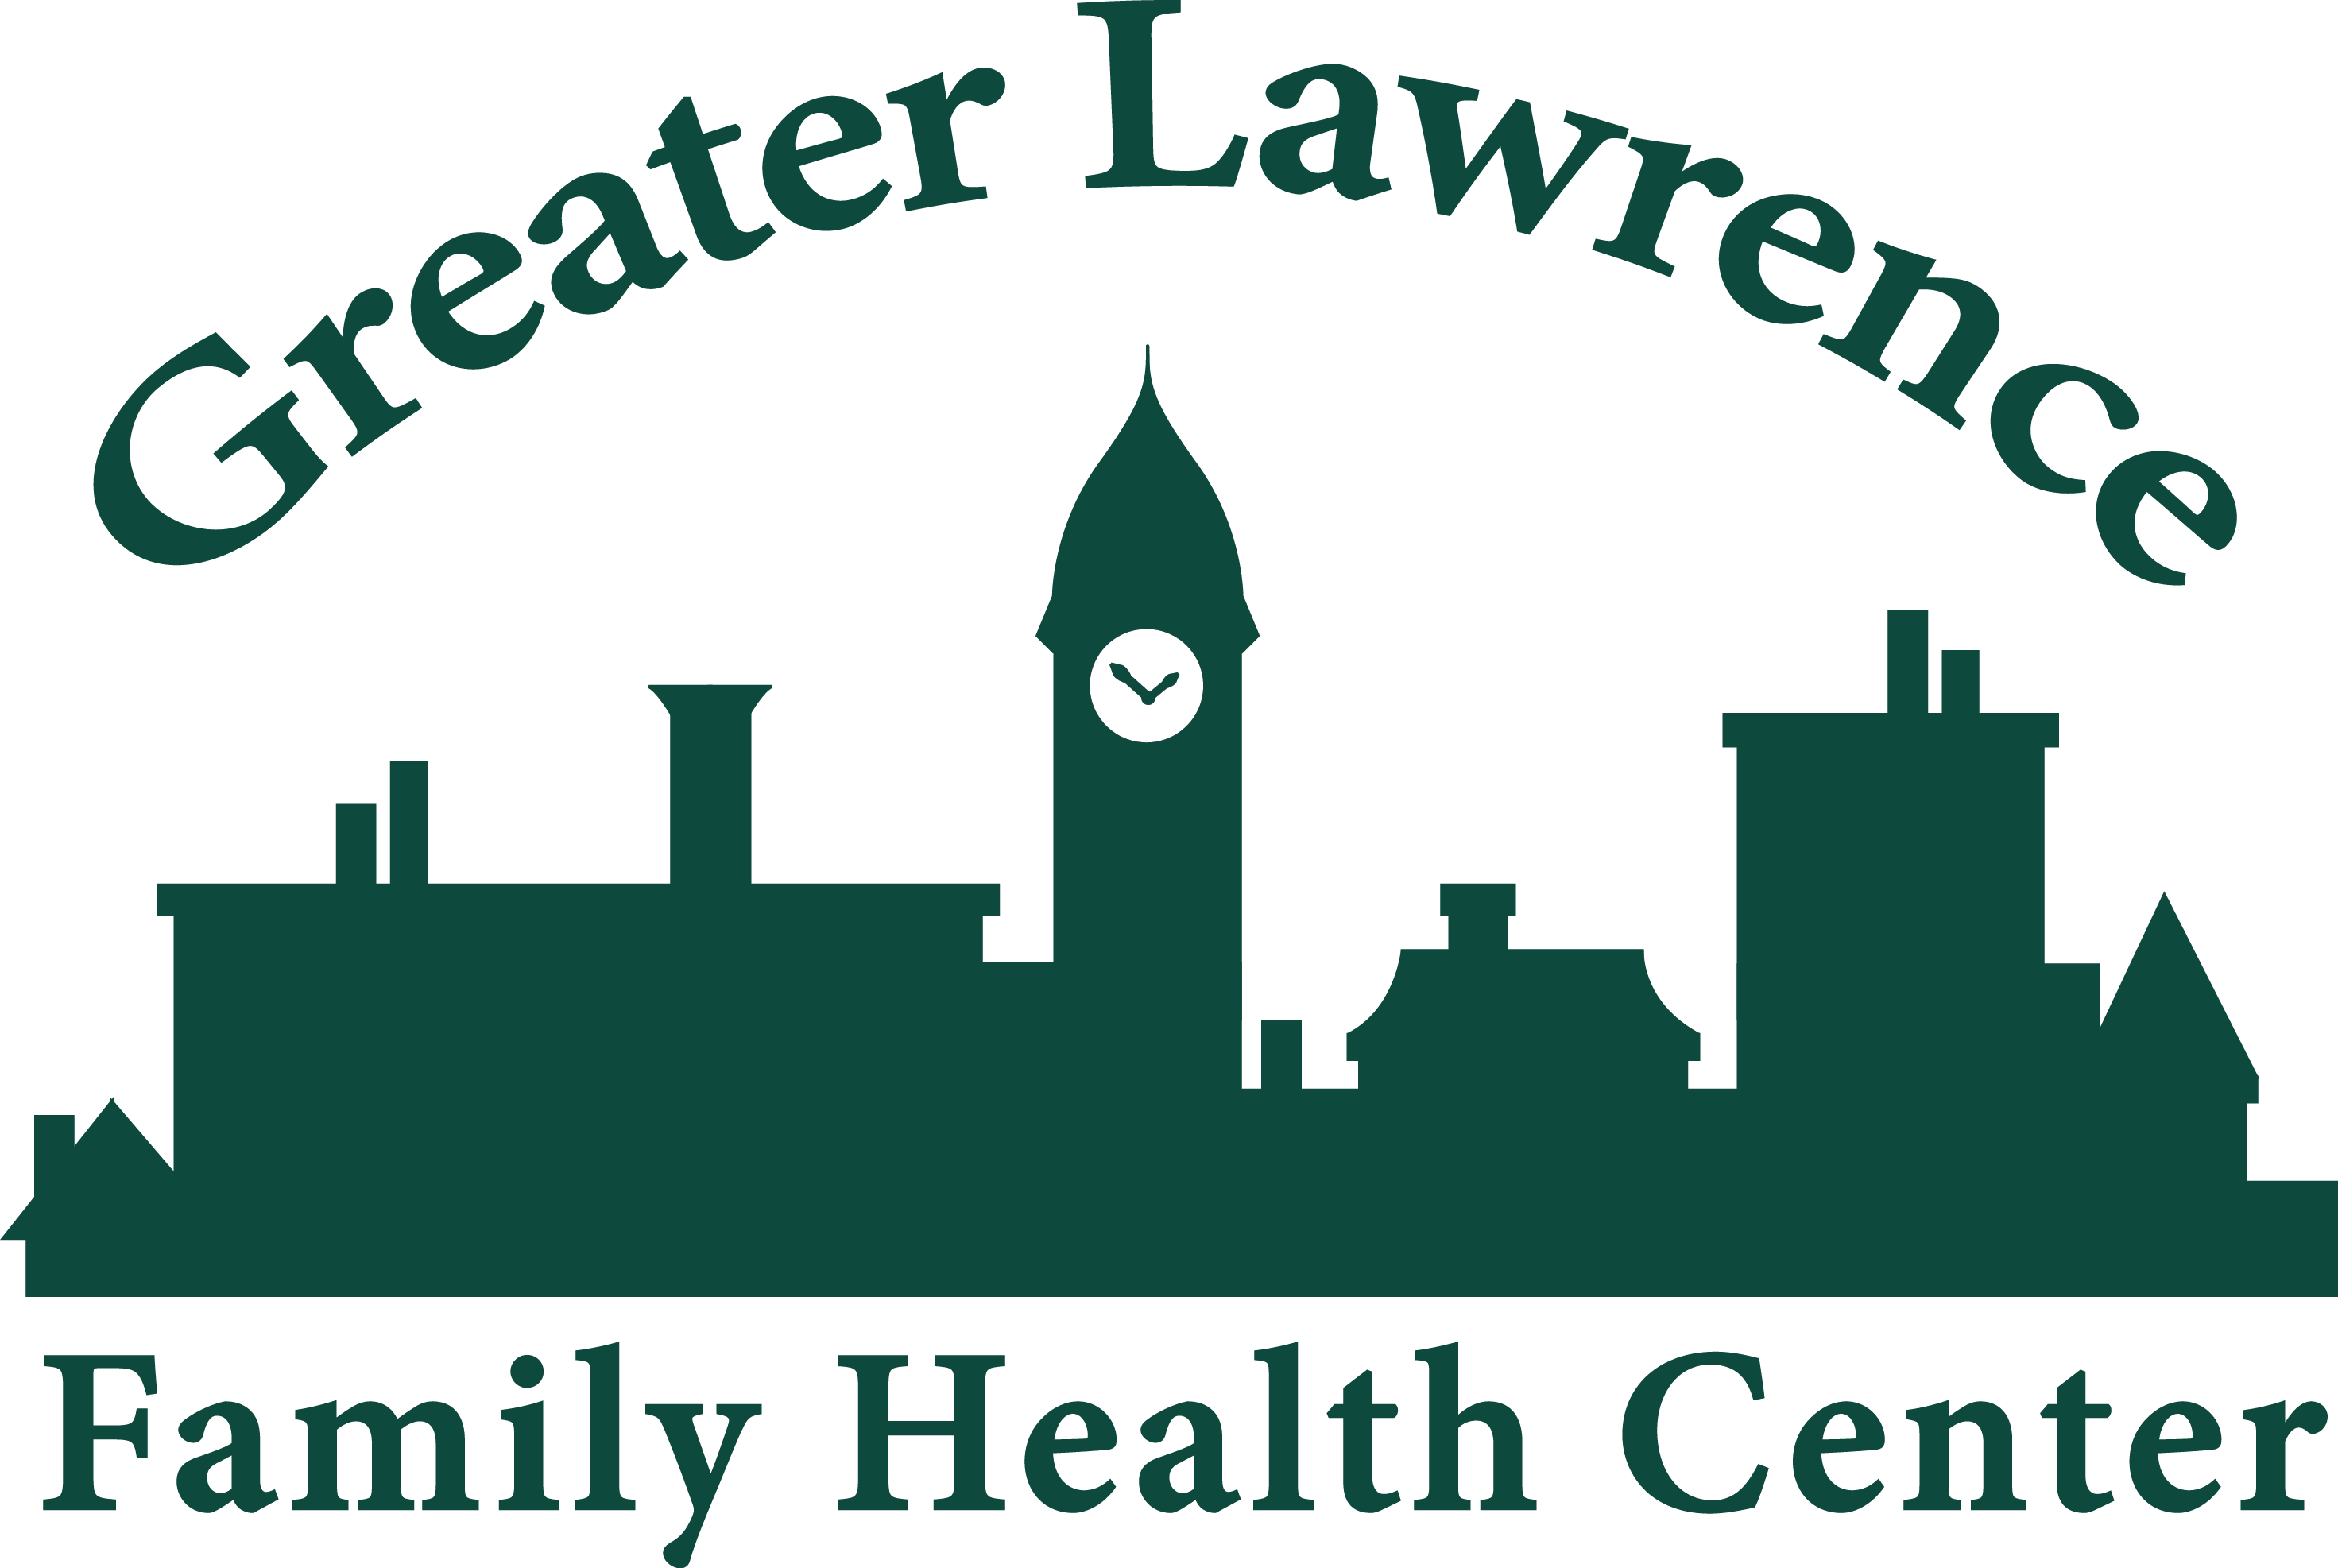 Official logo of Greater Lawrence Family Health Center